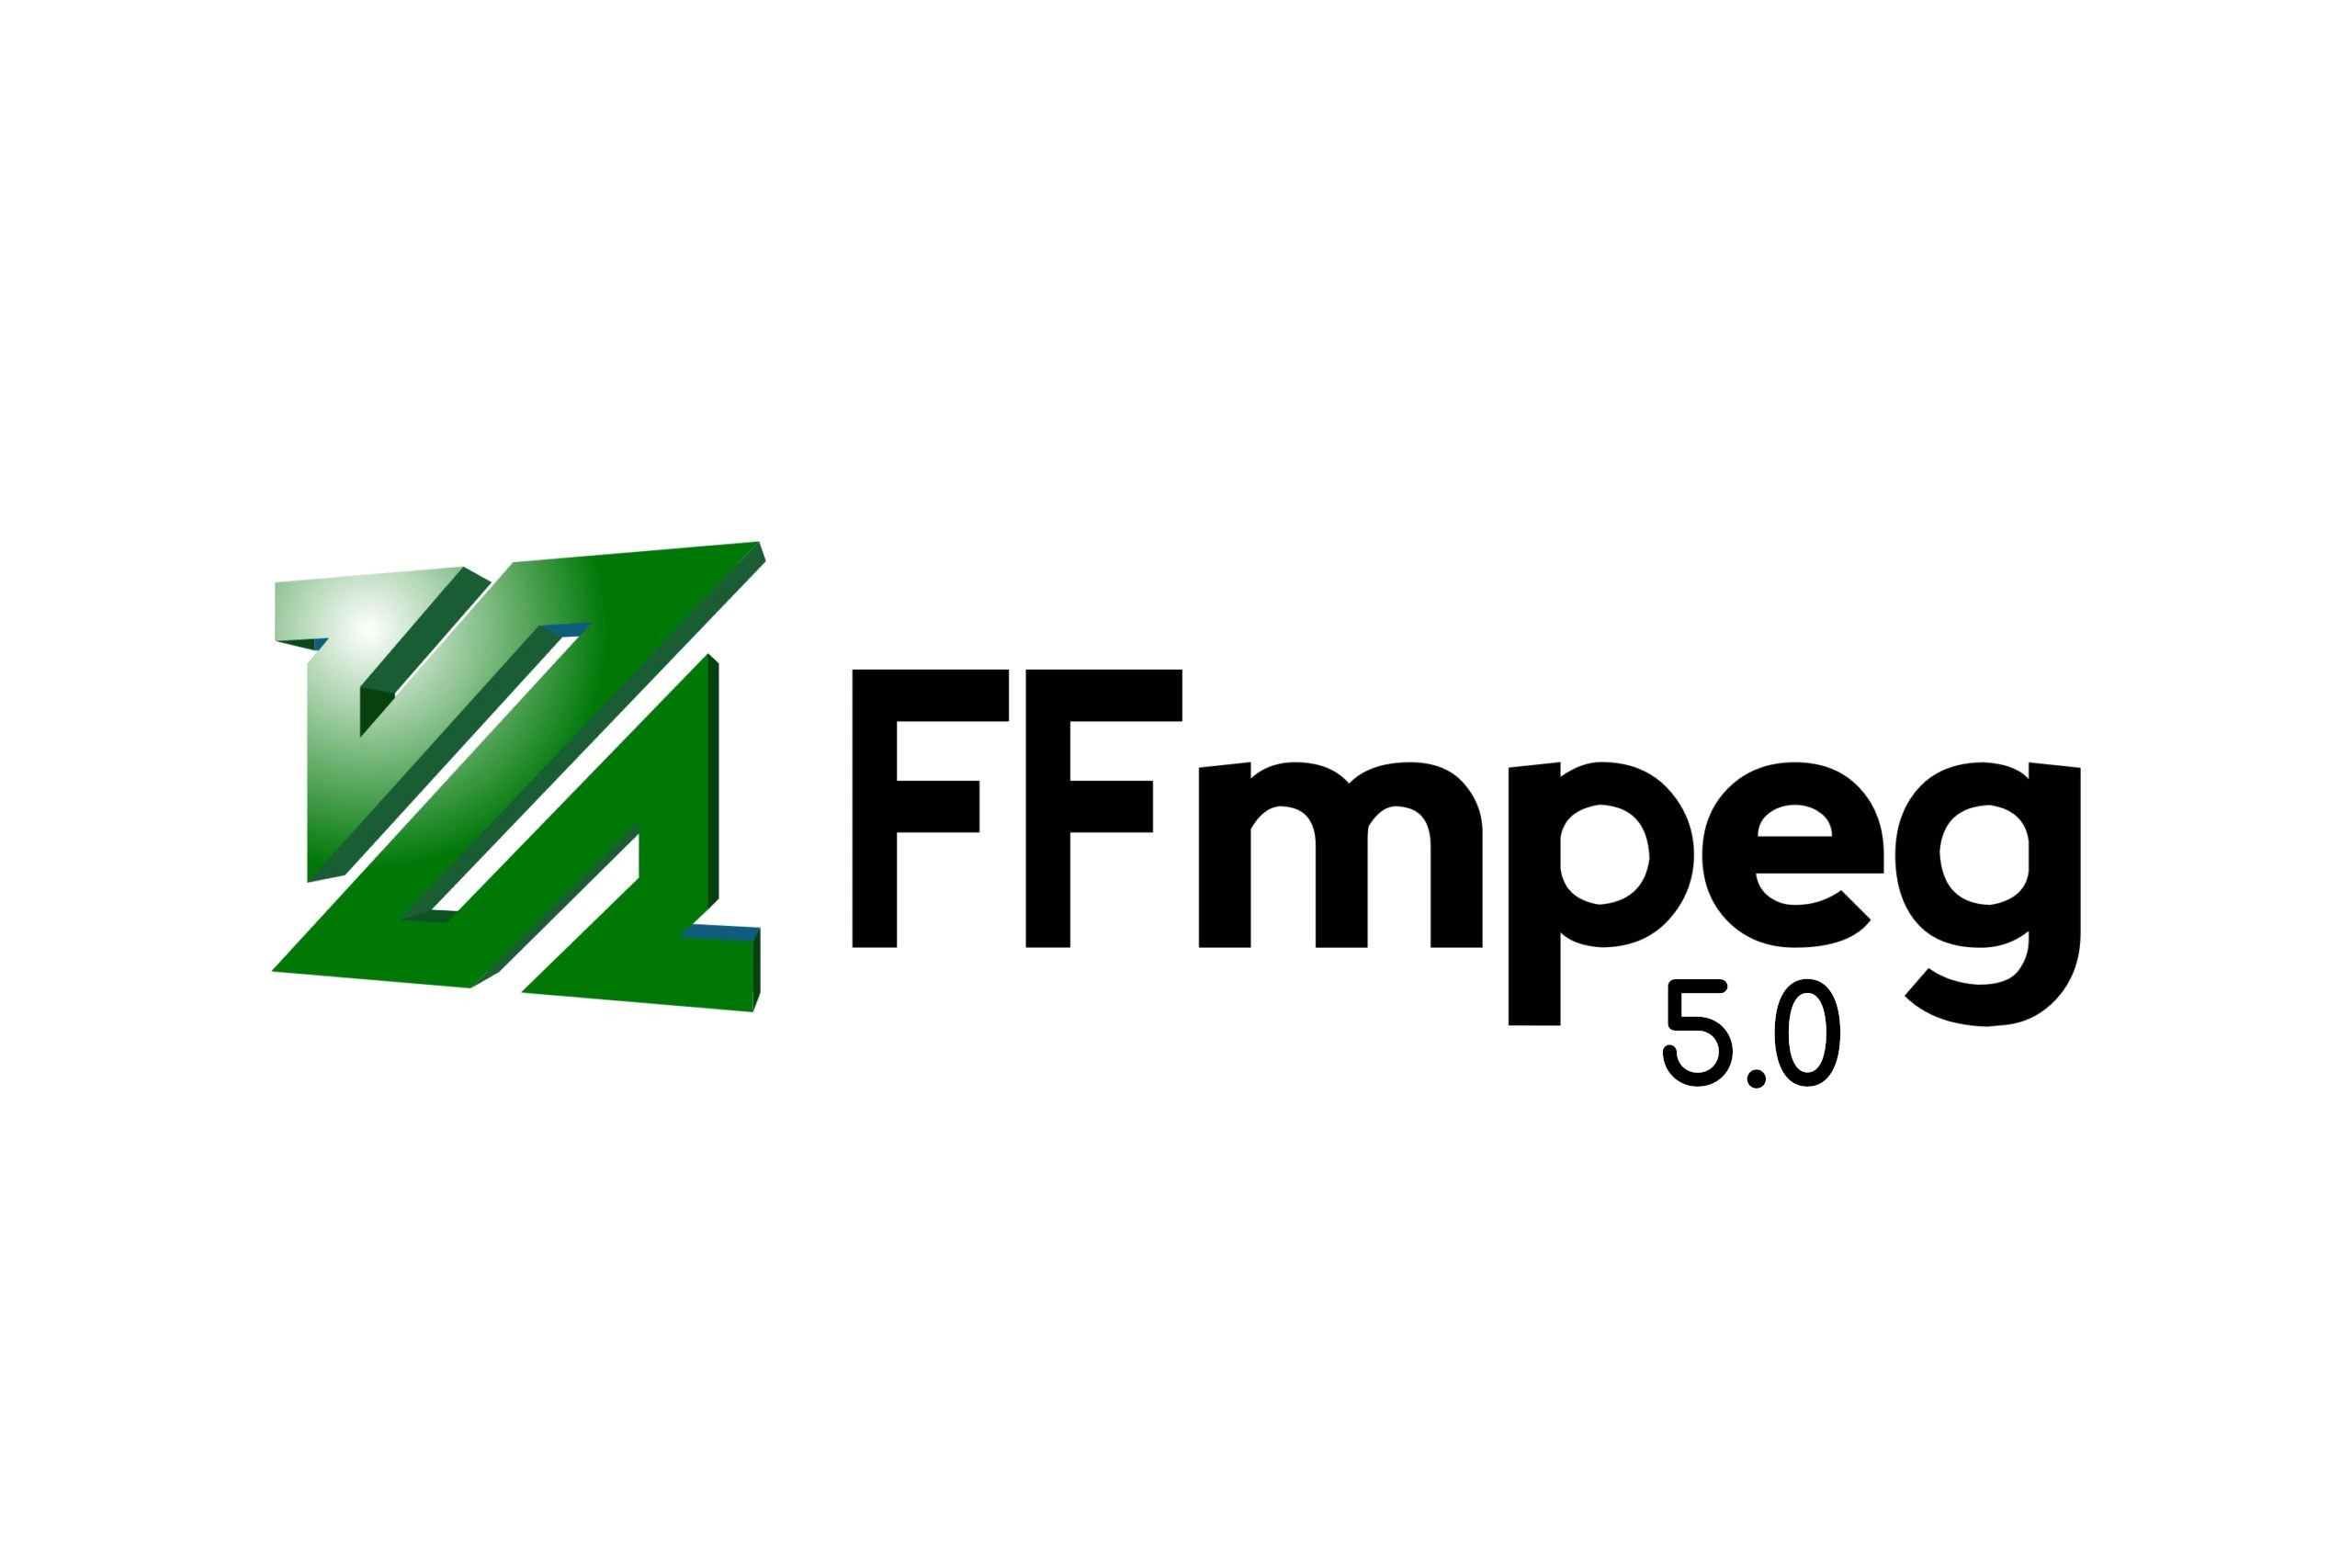 FFmpeg 5.0 “Lorentz” Released with New Encoders, Decoders, Muxers, and More